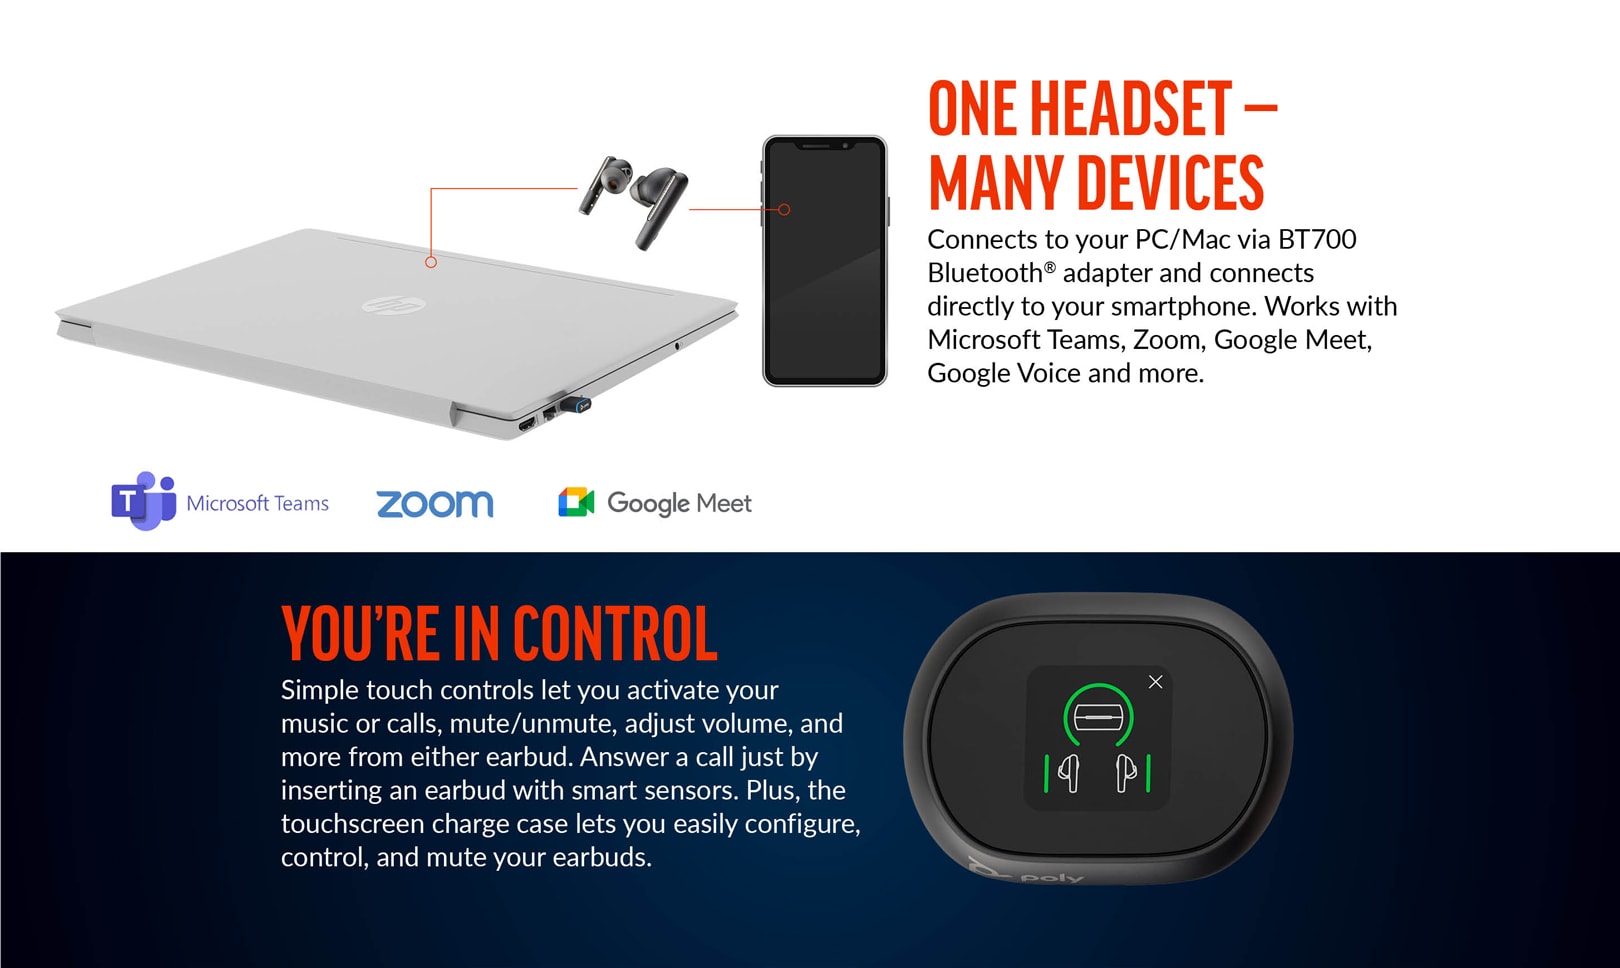 You're in control. One headset, many devices.